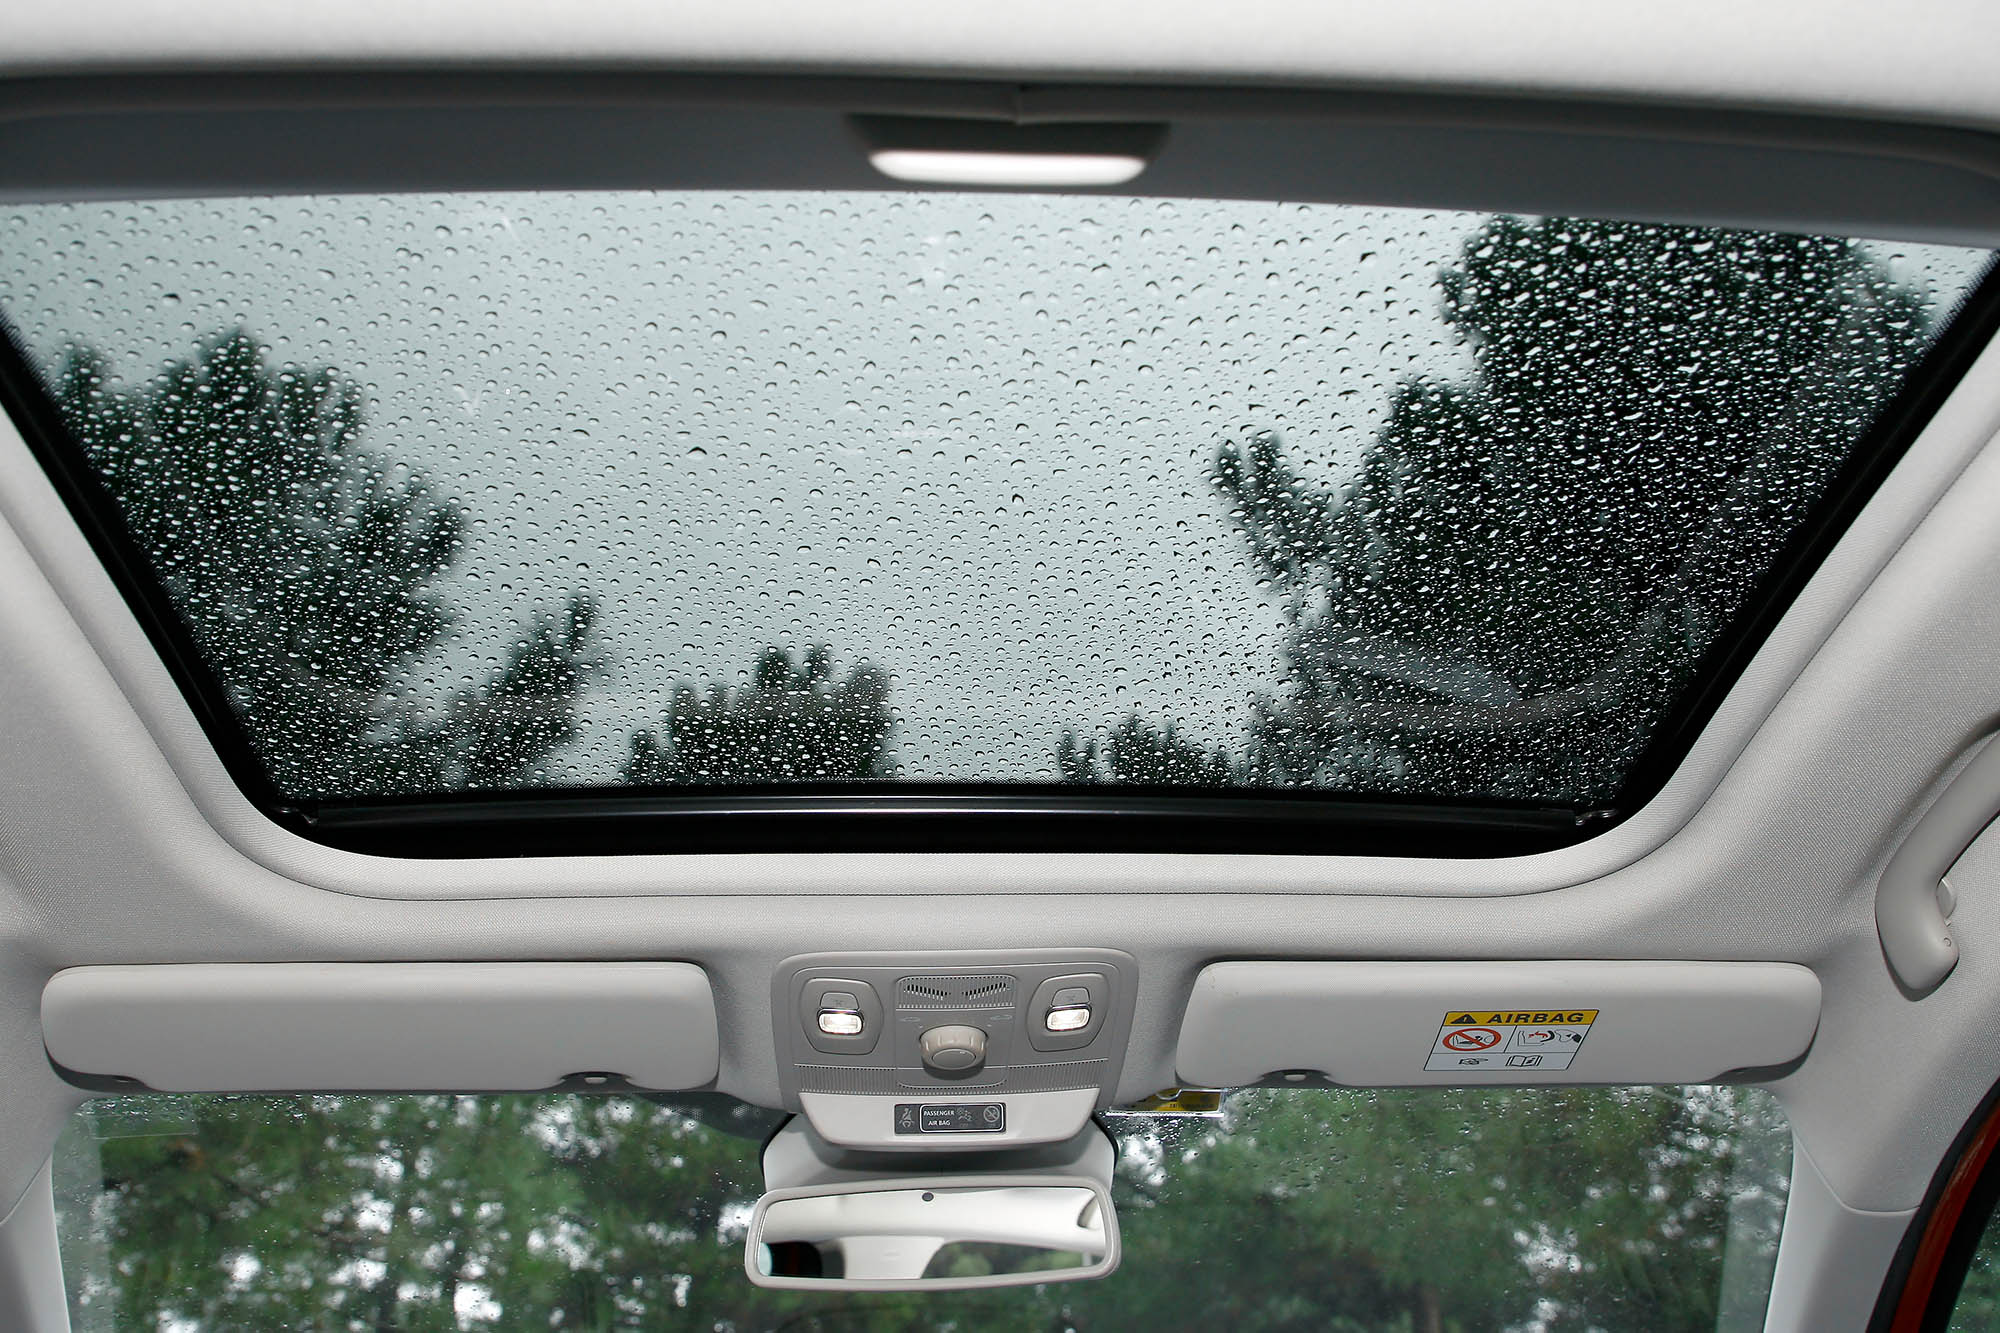 Vehicle sunroof with raindrops on it